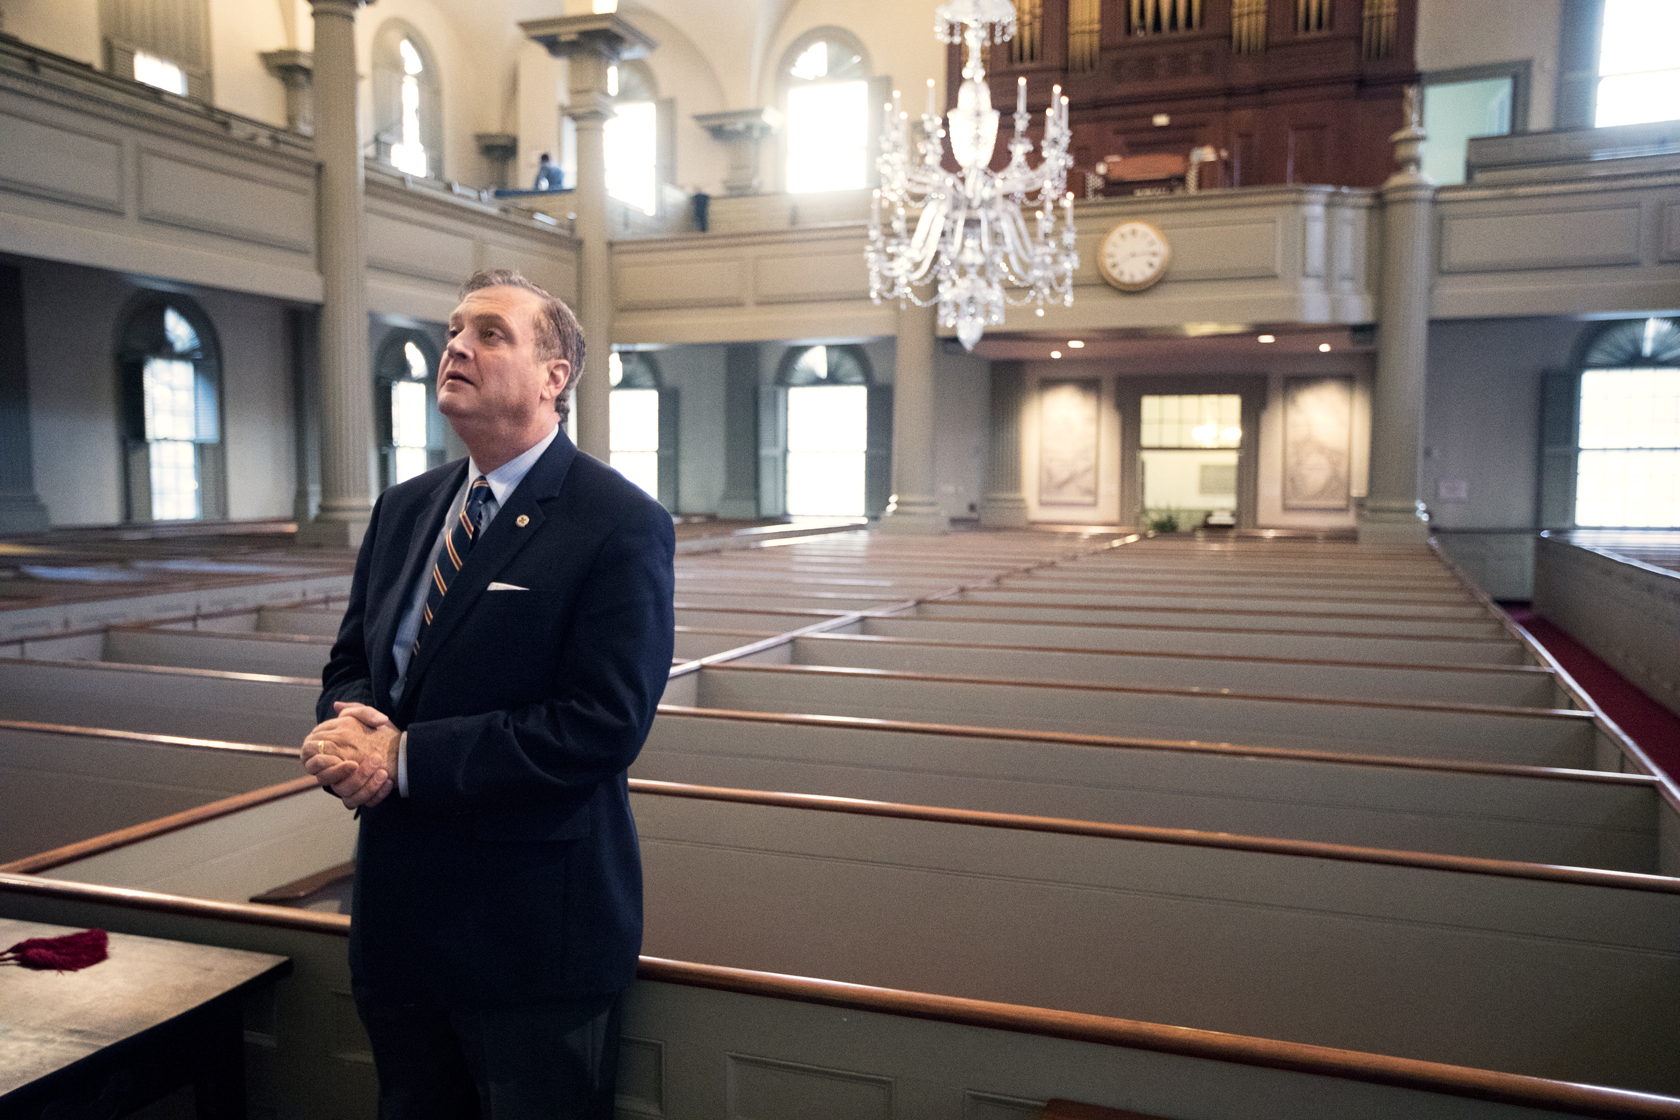 Mohler stands in the sanctuary of the First Baptist Church in America in Providence, Rhode Island.